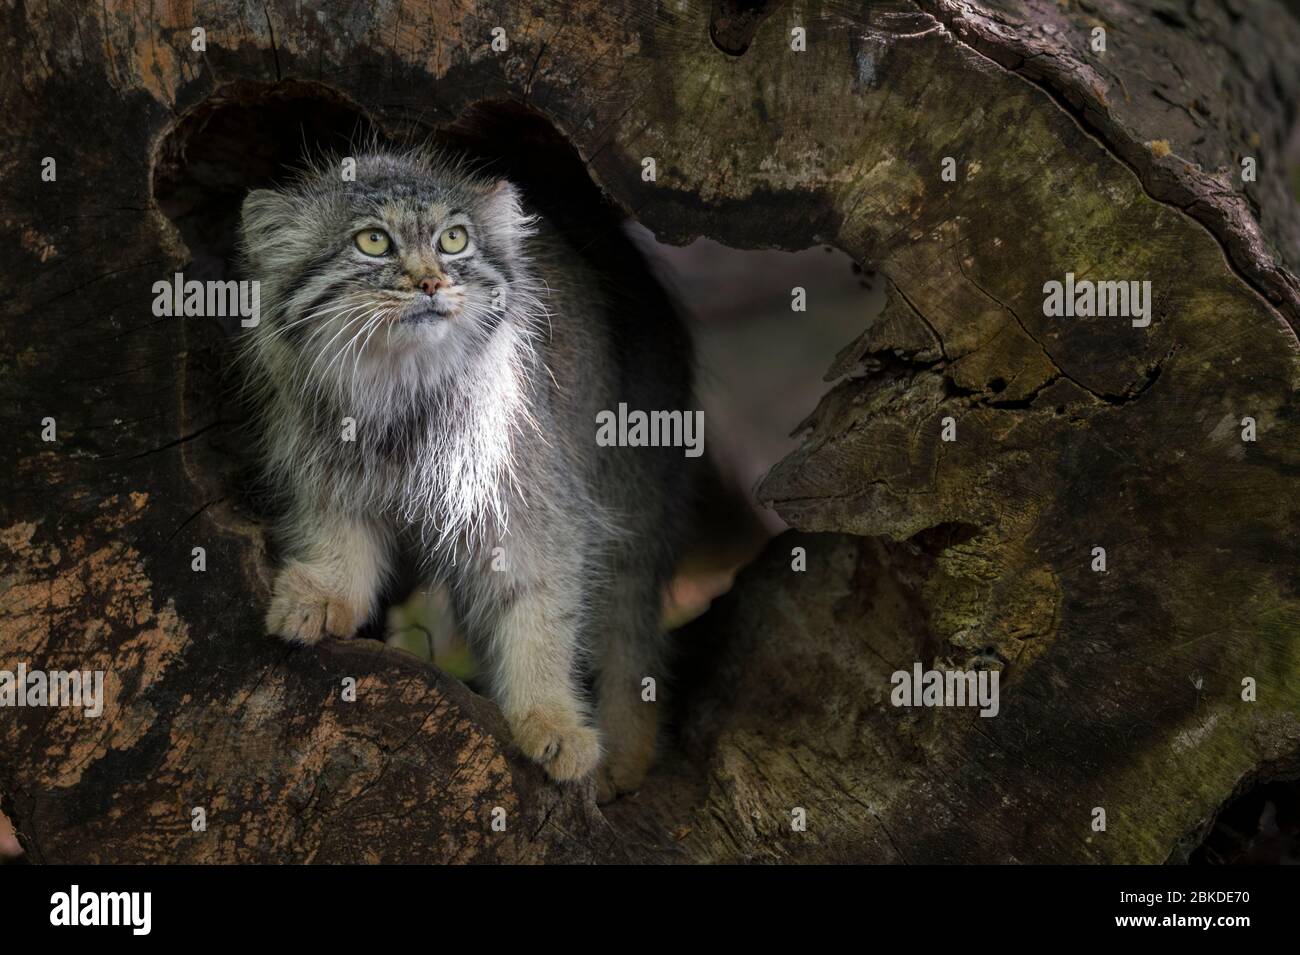 Pallas cat (Otocolobus manul, Felis manul) peering out from a tree trunk Stock Photo